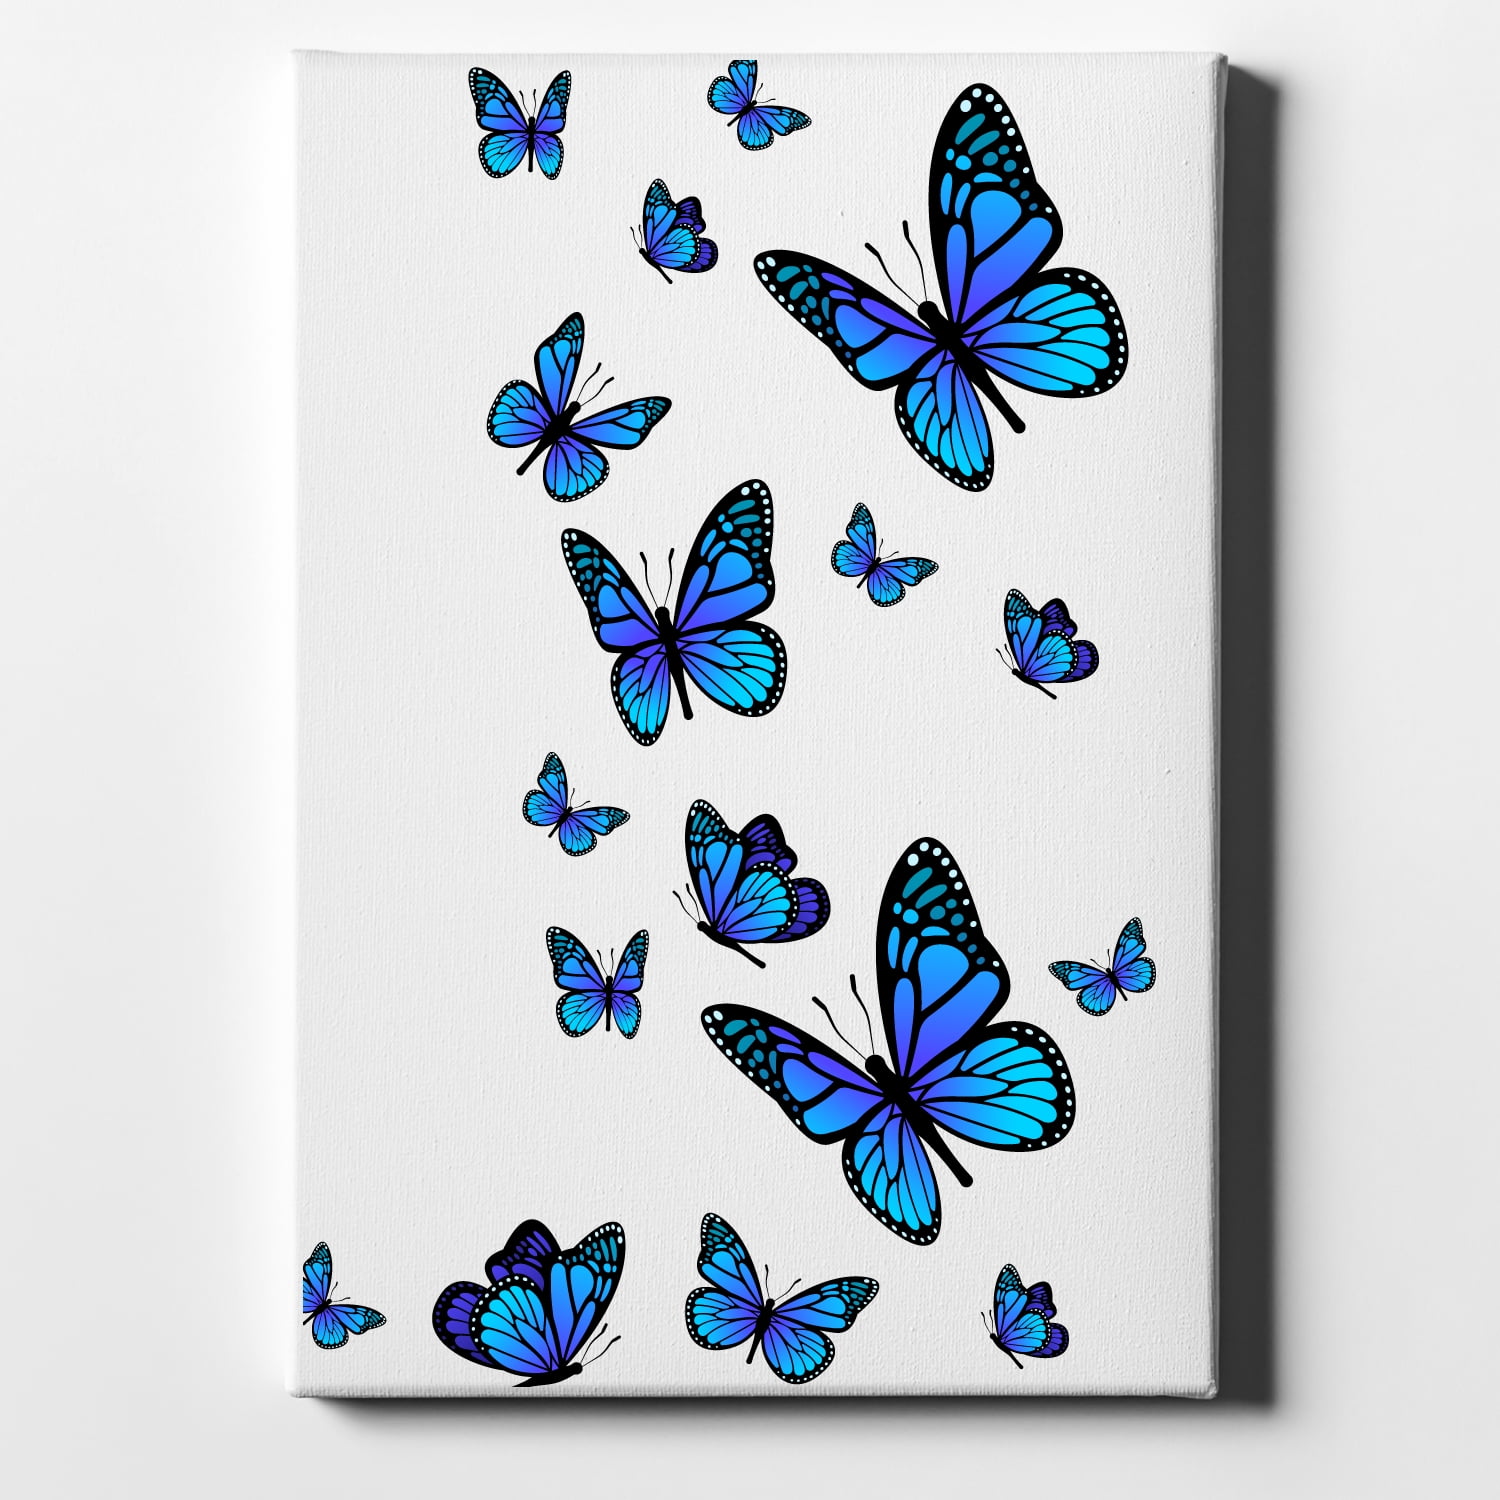 Details about   Blue Gray Butterflies Bubbles Decorative Bathroom Wall Art Matted Picture 